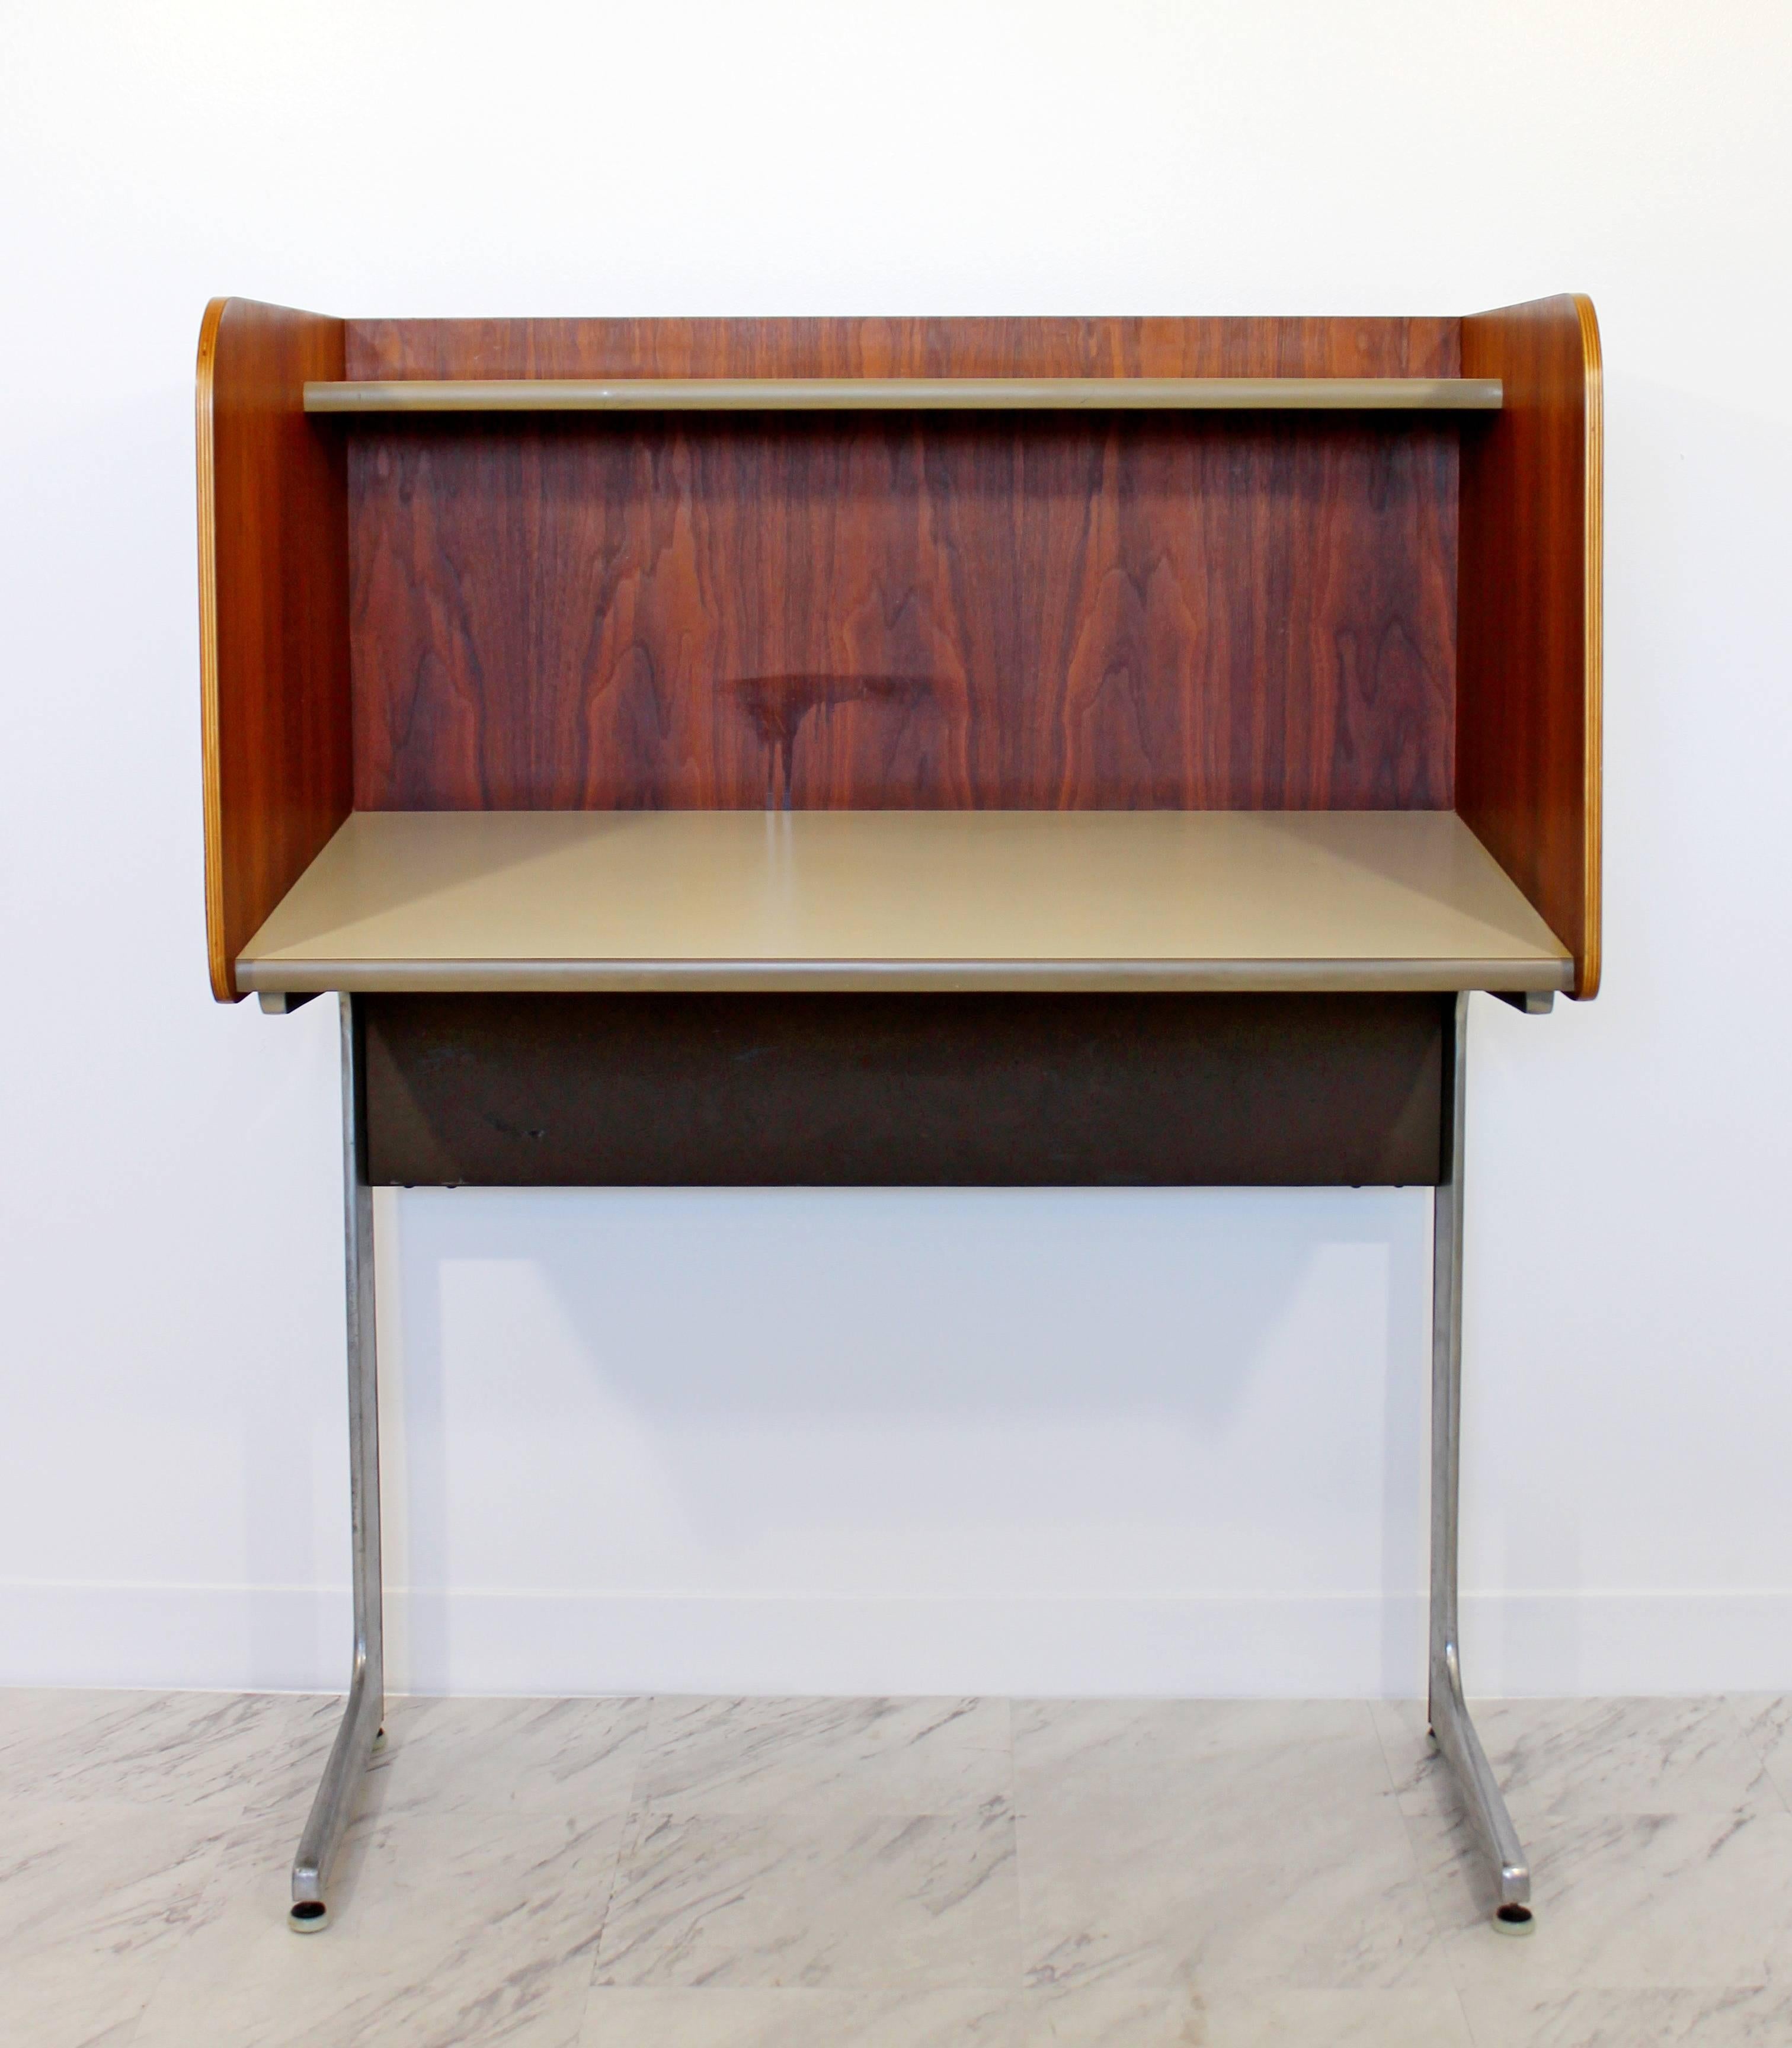 For your consideration is a gorgeous, upright desk, with privacy walls and flap, by Herman Miller, circa the 1960s. In excellent condition. The dimensions are 36